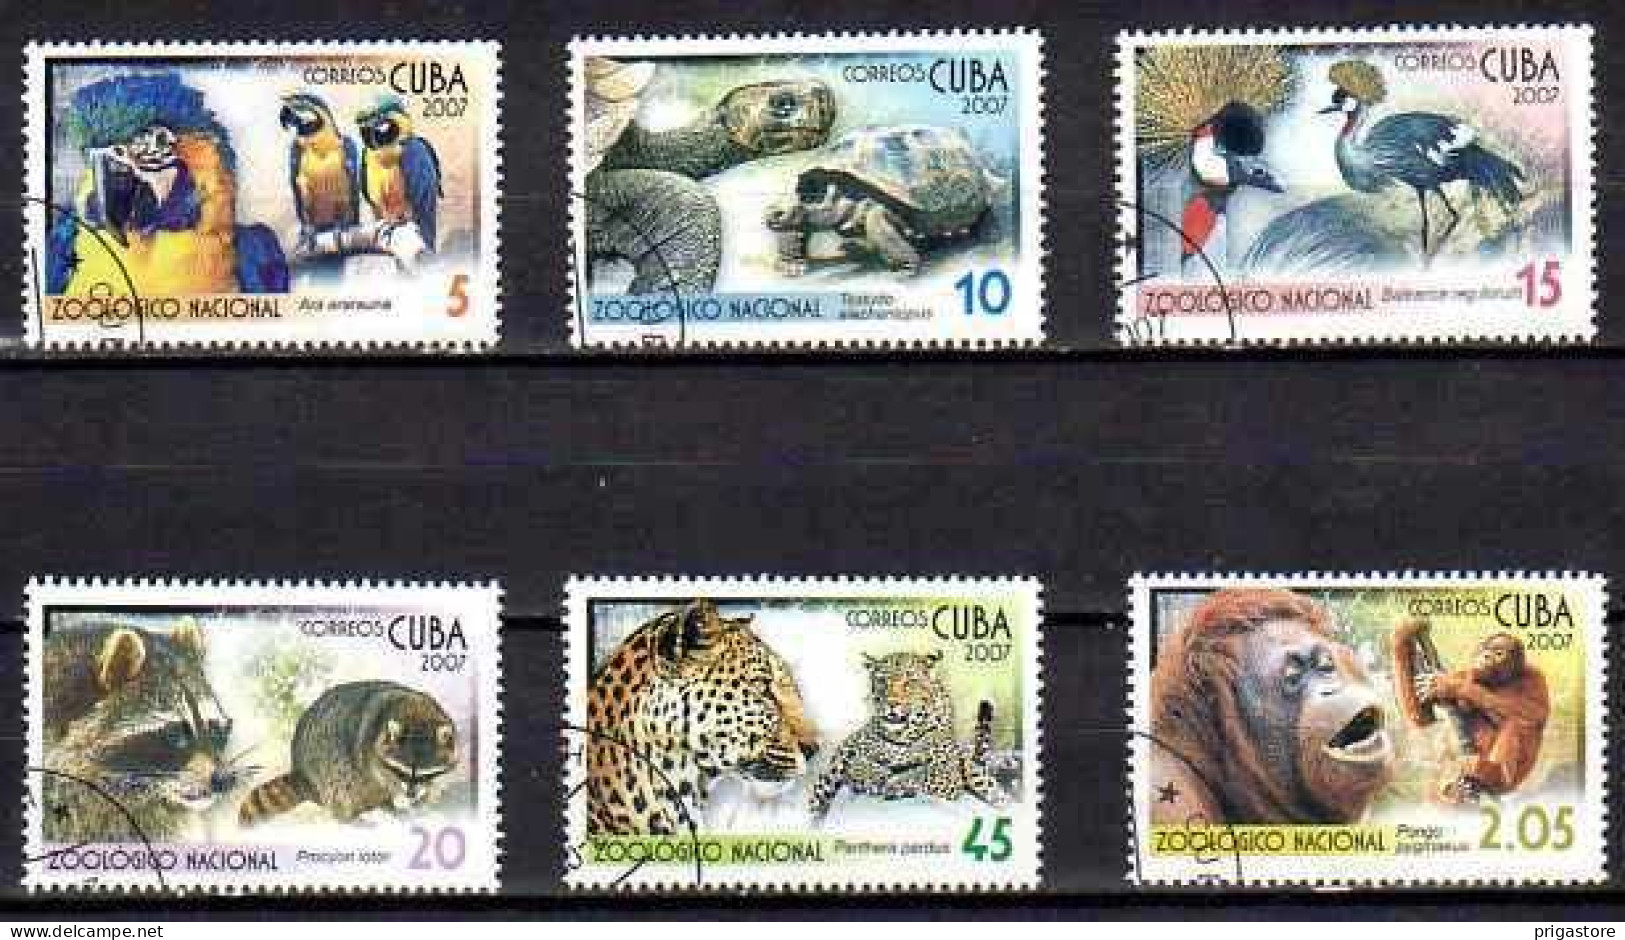 Cuba 2007 Animaux Sauvages (65) Yvert N° 4440 à 4445 Oblitéré Used - Used Stamps